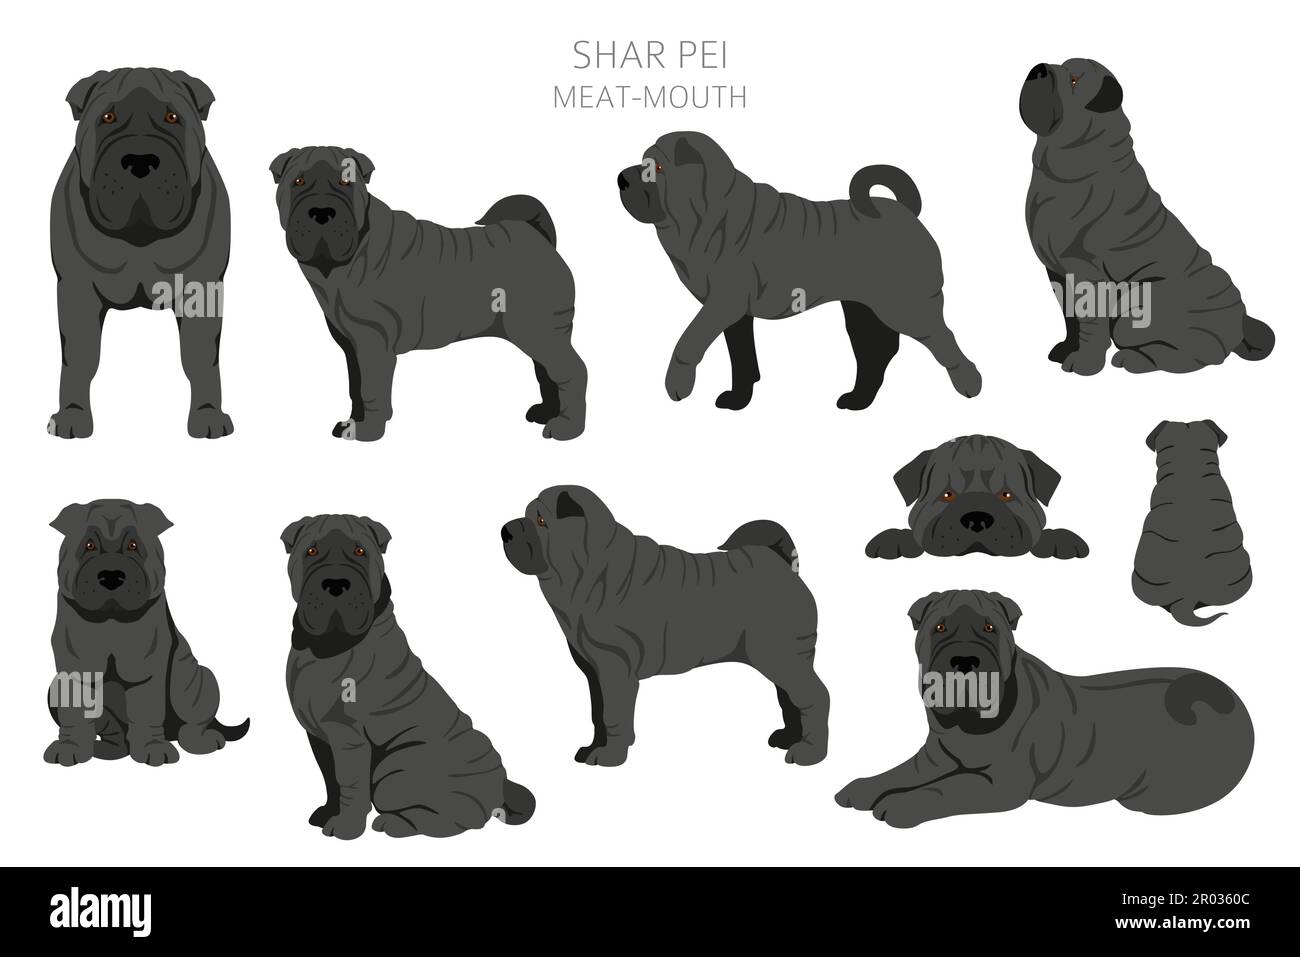 Shar Pei (modern) meat mouth clipart. Different poses, coat colors set.  Vector illustration Stock Vector